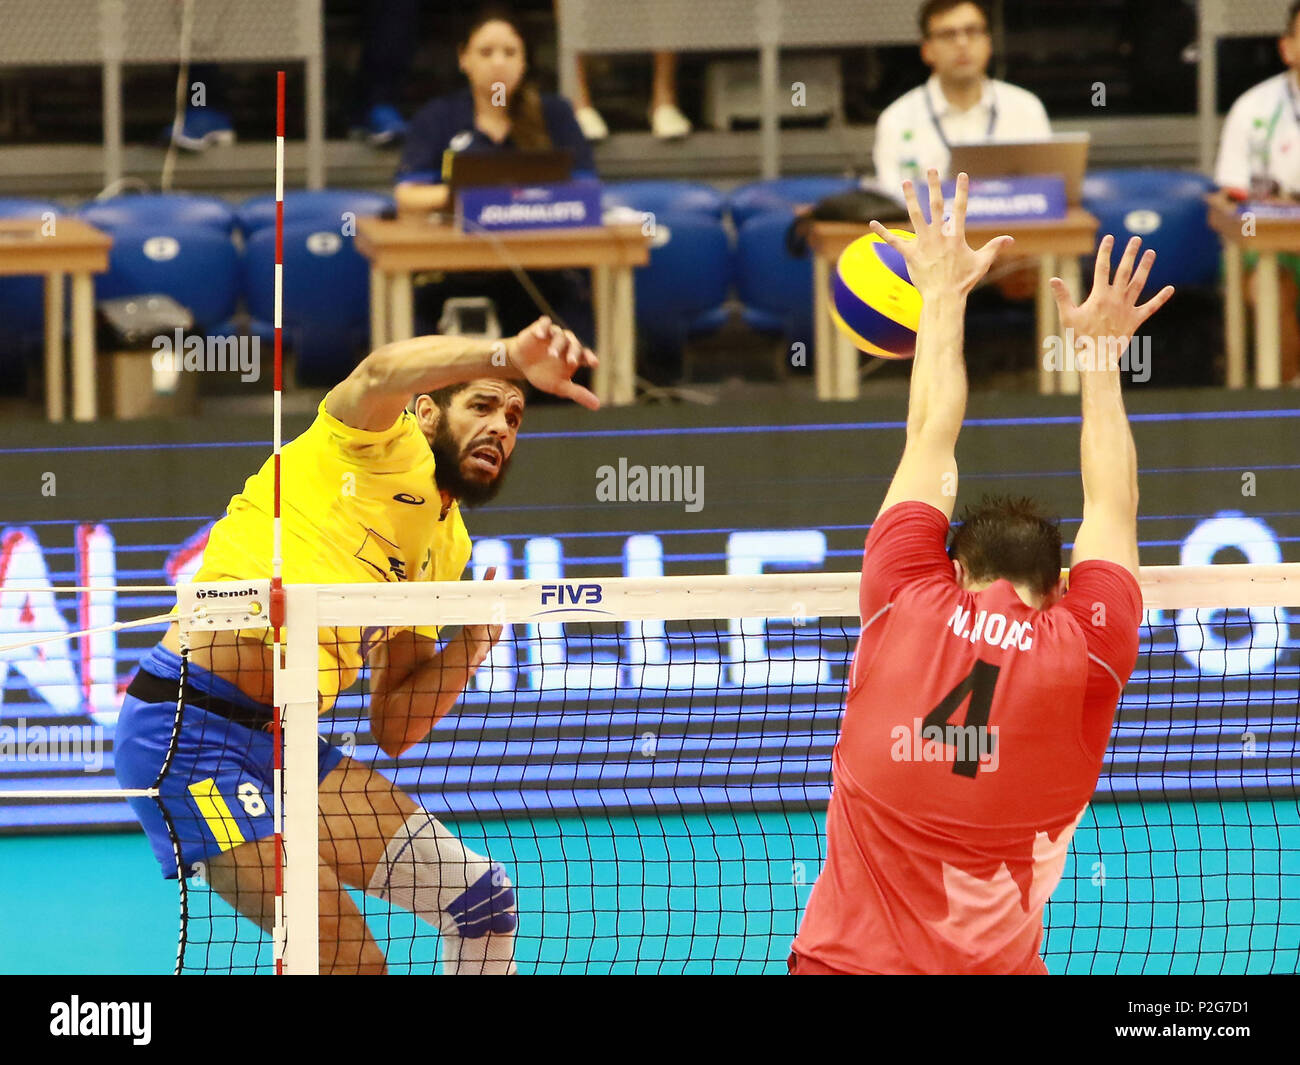 Varna, Bulgaria. 15th June, 2018. from left Wallace de SOUZA (Brazil), Nicholas HOAG (Canada), .mens Volleyball Nations League, week 4, Canada vs Brazil, Palace of culture and sport, Varna/Bulgaria, June 15, 2018, the fourth of 5 weekends of the preliminary lap in the new established mens Volleyball Nationas League takes place in Varna/Bulgaria. Credit: Wolfgang Fehrmann/ZUMA Wire/Alamy Live News Stock Photo